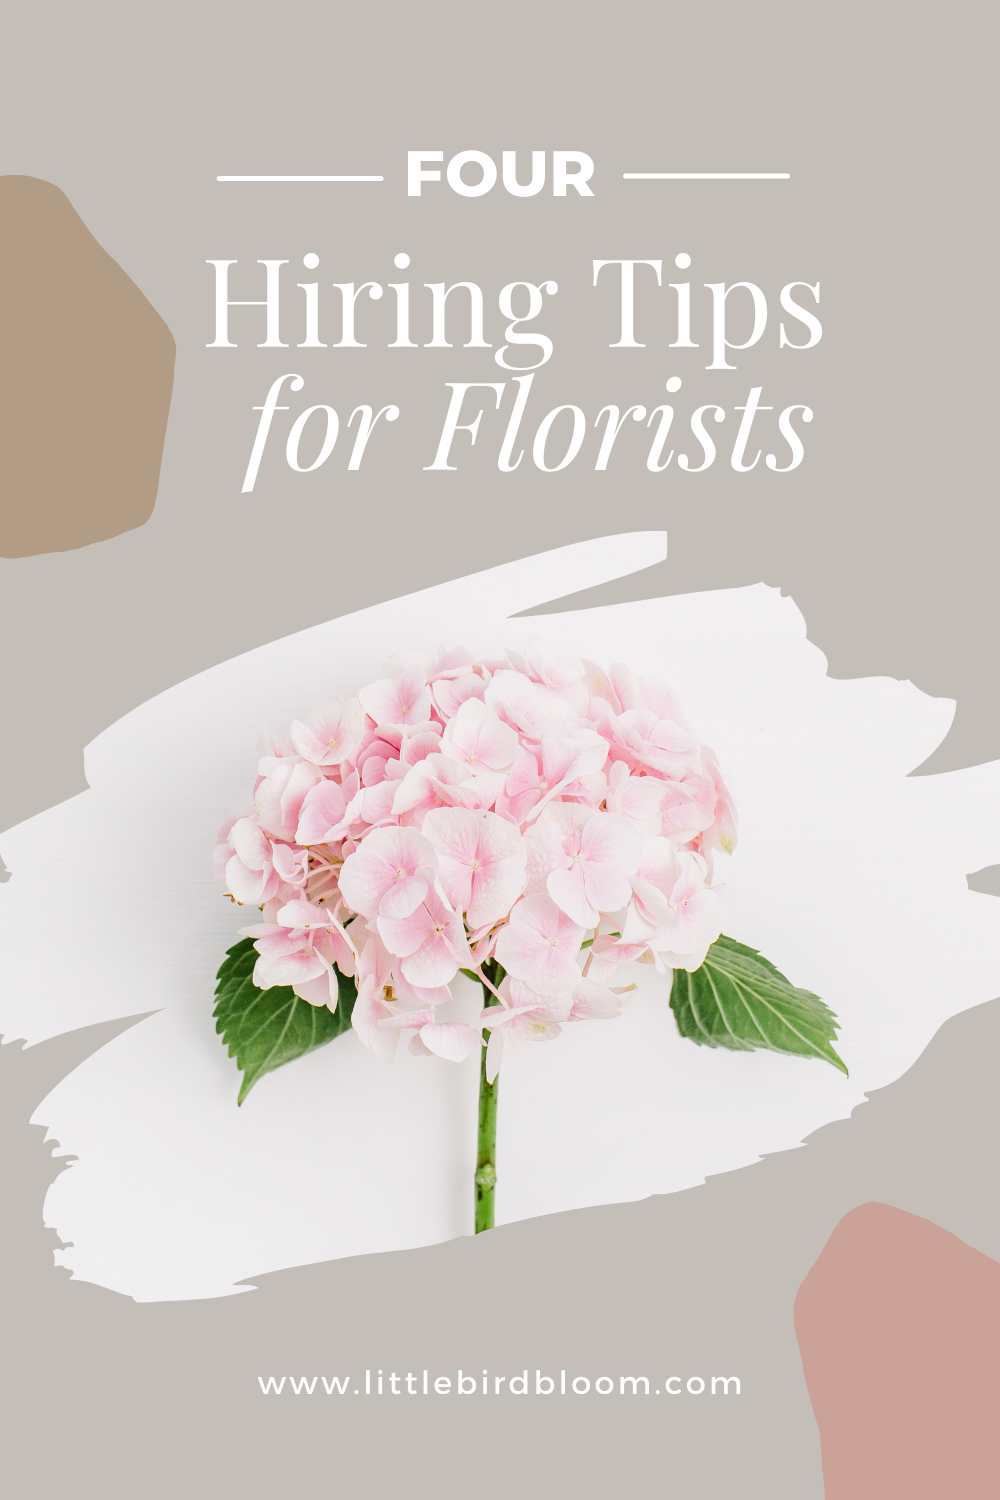 new podcast for florists - hiring tips for florists